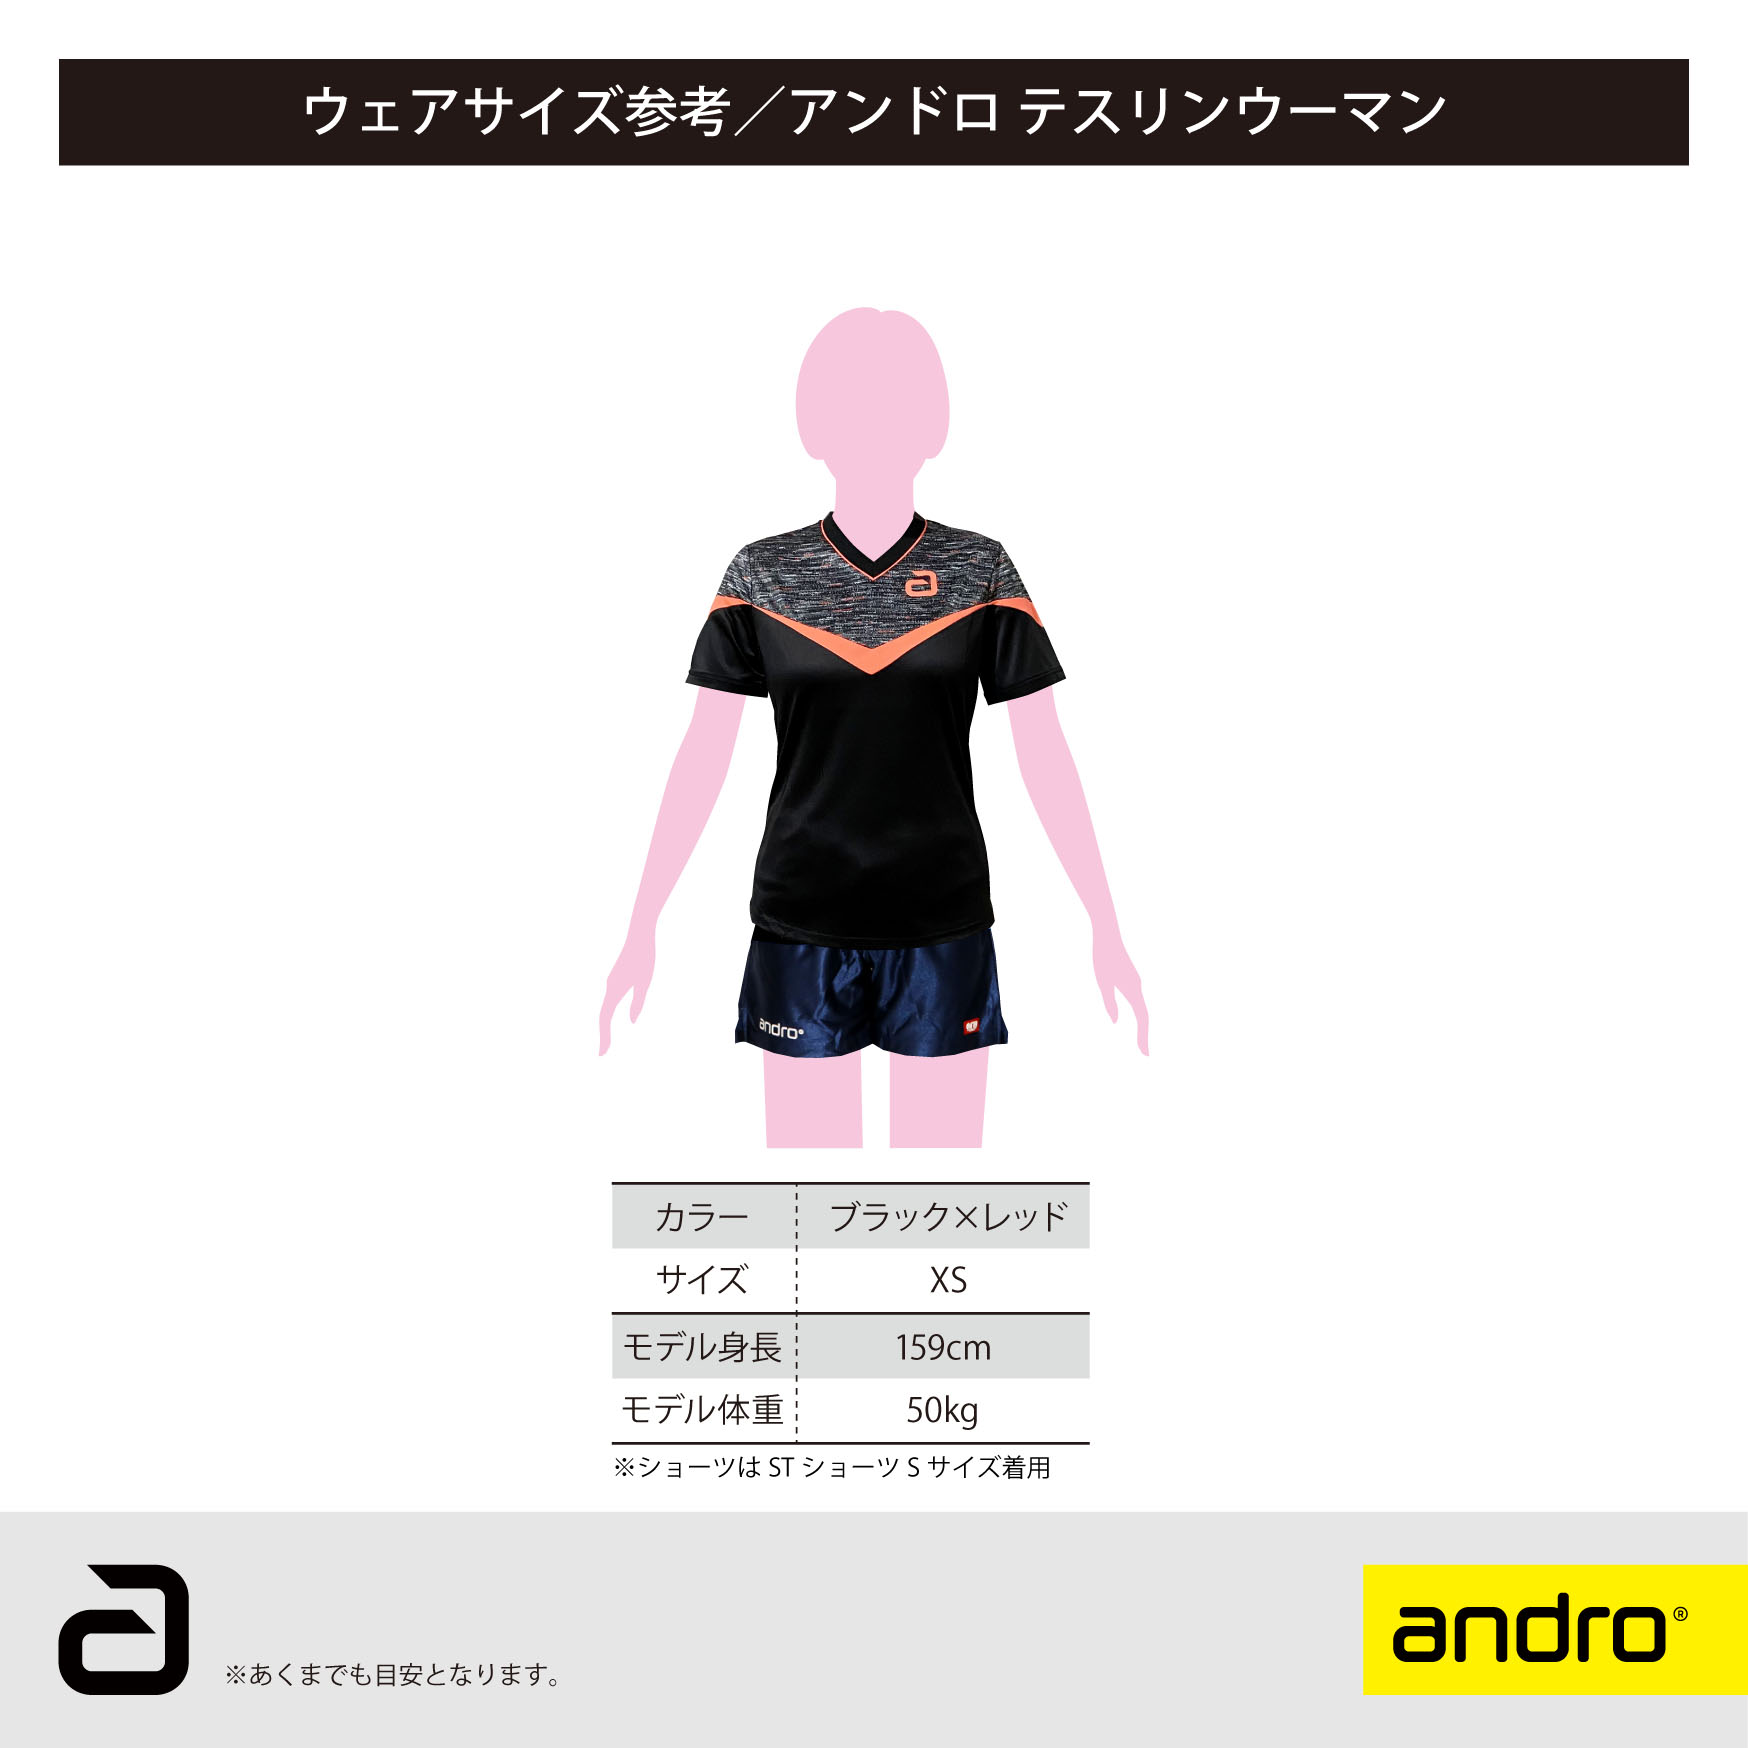 ANDRO_TESLIN WOMEN_size_20220317_JP